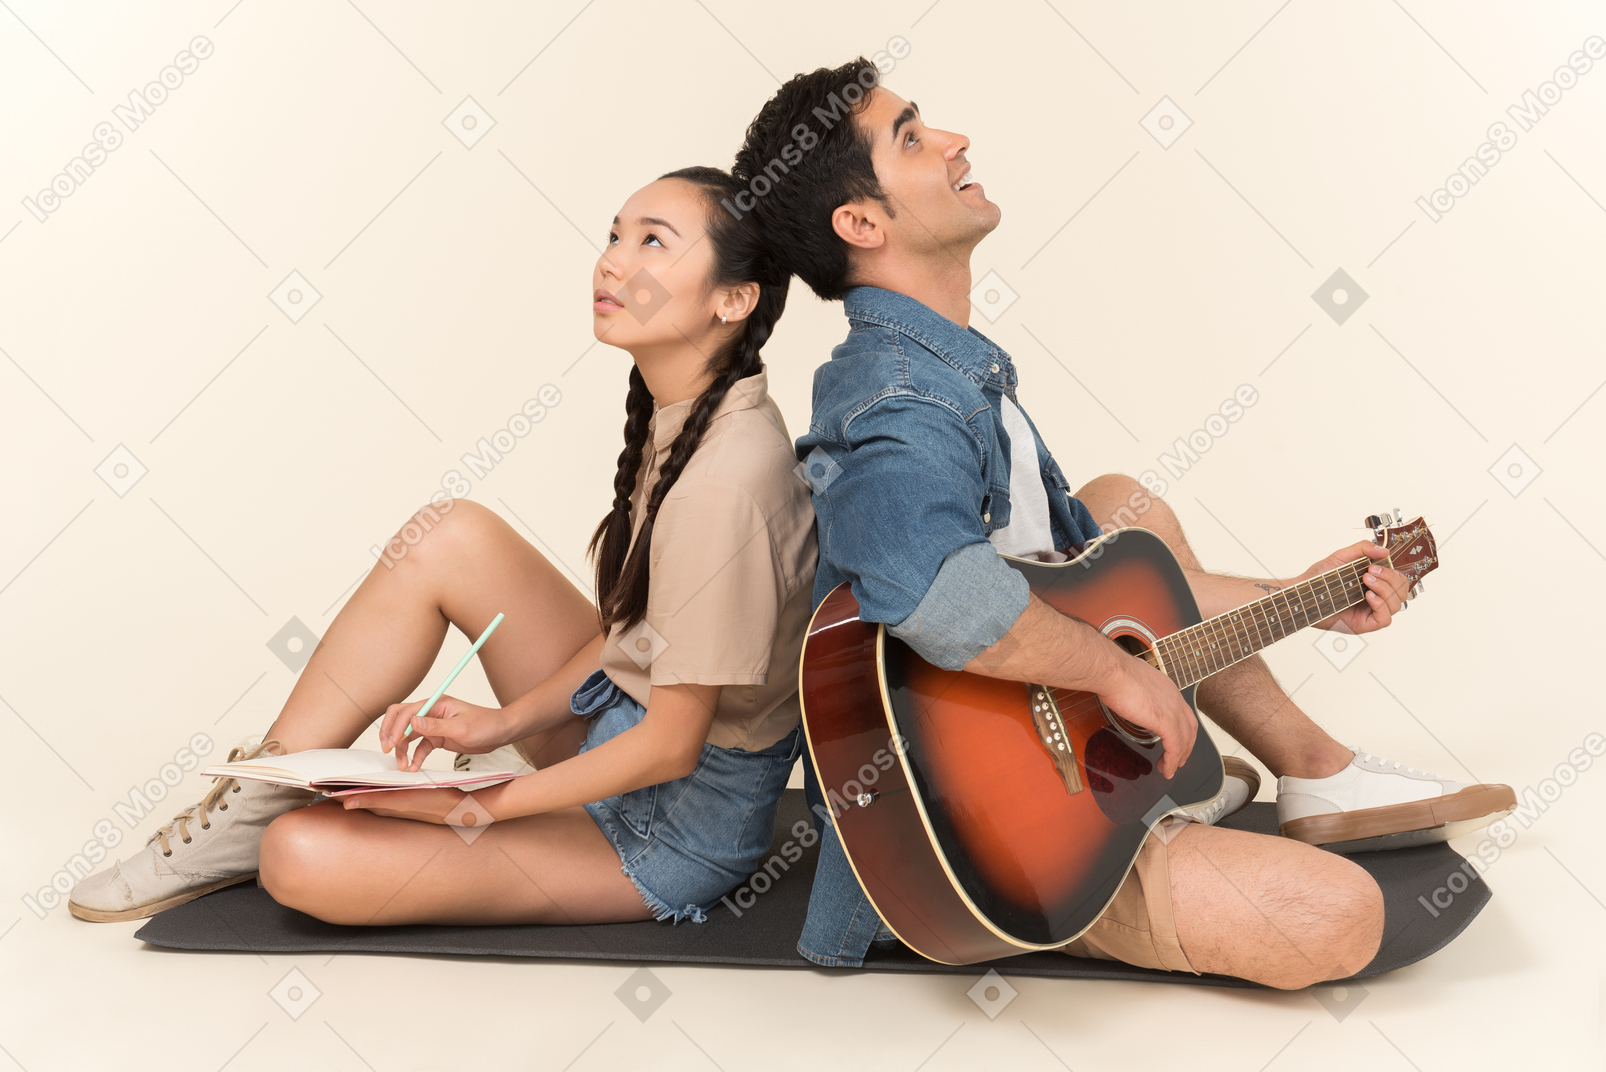 Laughing interracial couple sitting back to back and man playing guitar